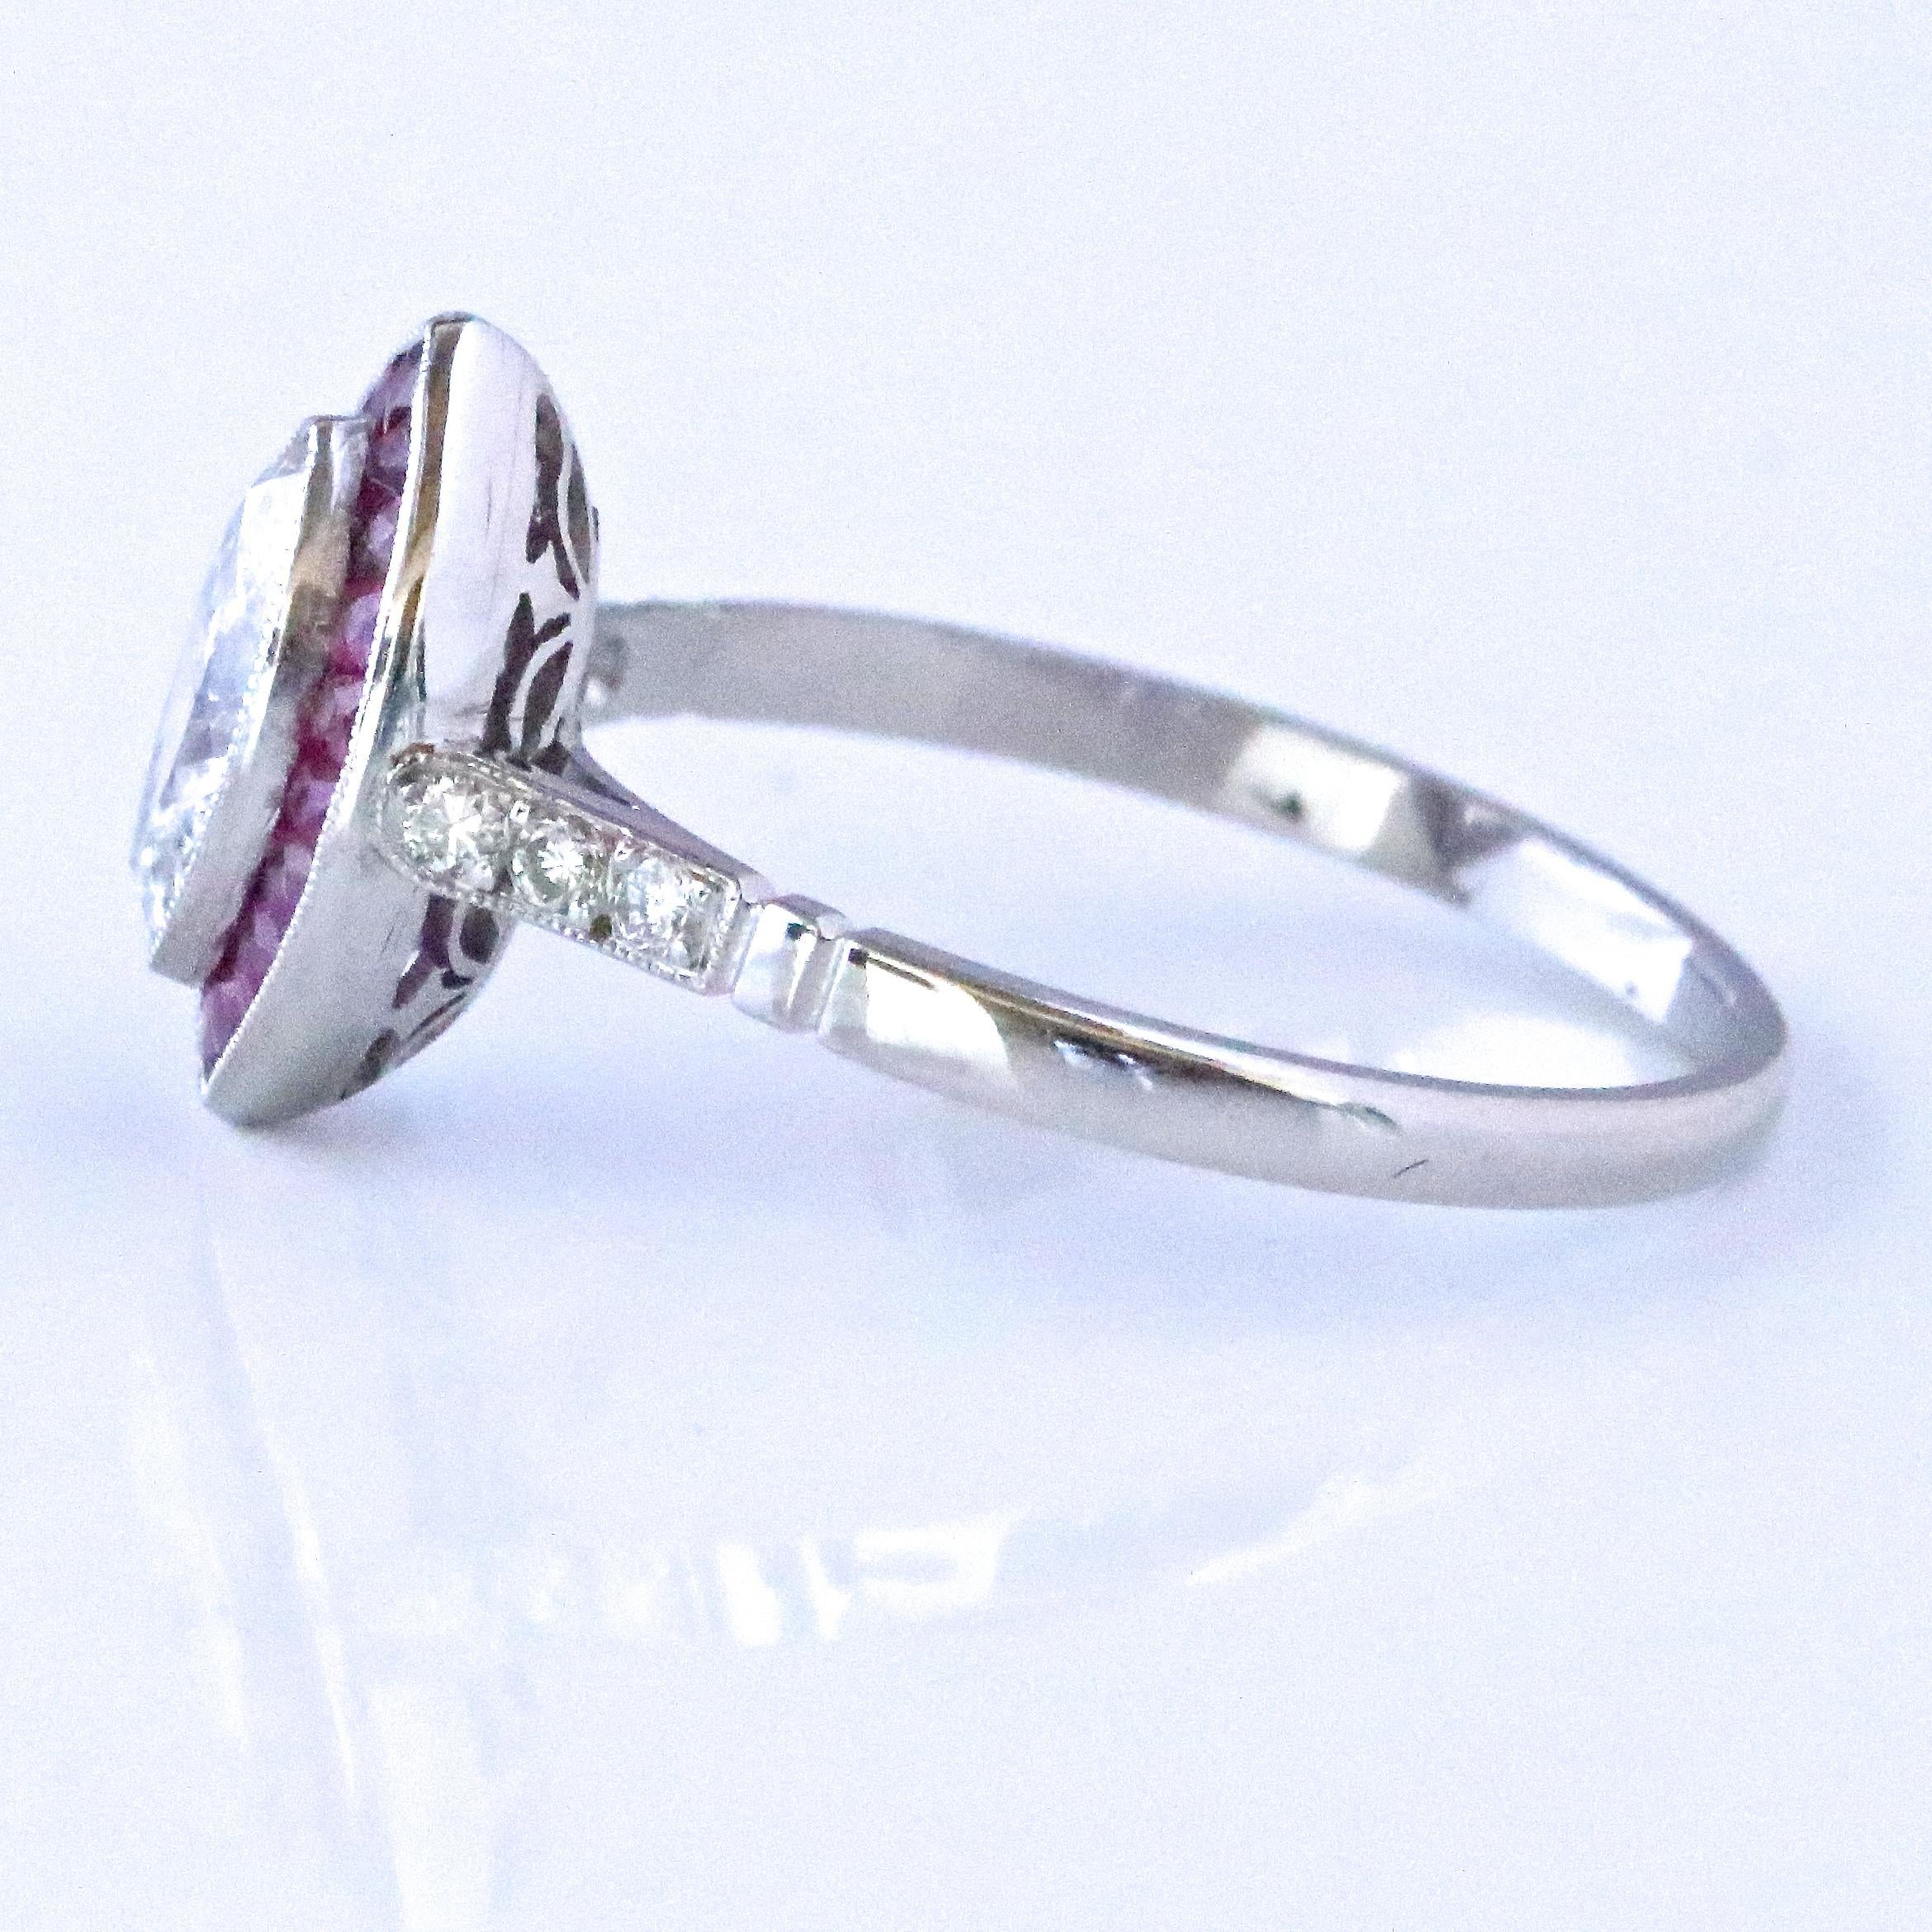 The Art Deco style never gets old! The dancing, the cocktails, the lifestyle, all the things the Roaring 20's are known for. Feel yourself like a 1920's fashionista wearing this gorgeous Art Deco Inspired Diamond Ruby Ring. The center stone is a